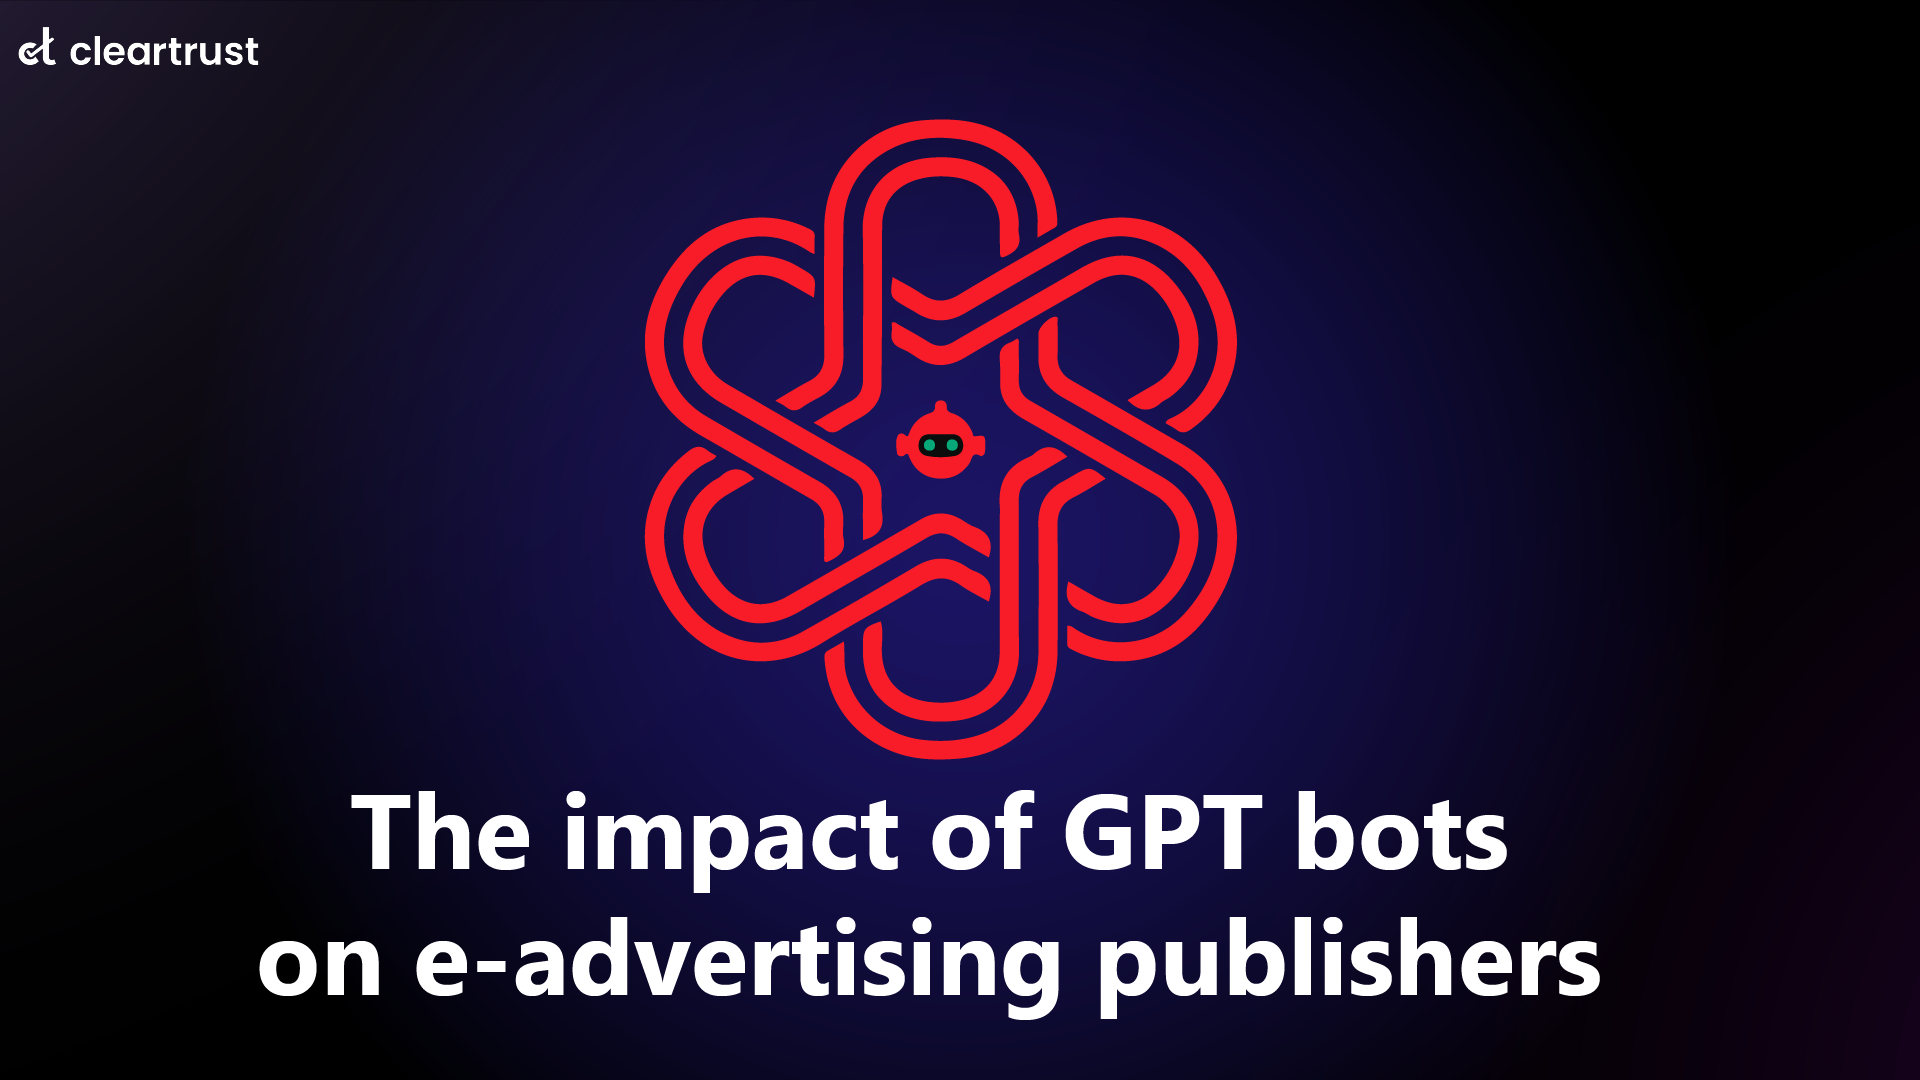 The impact of GPT bots on e-advertising publishers